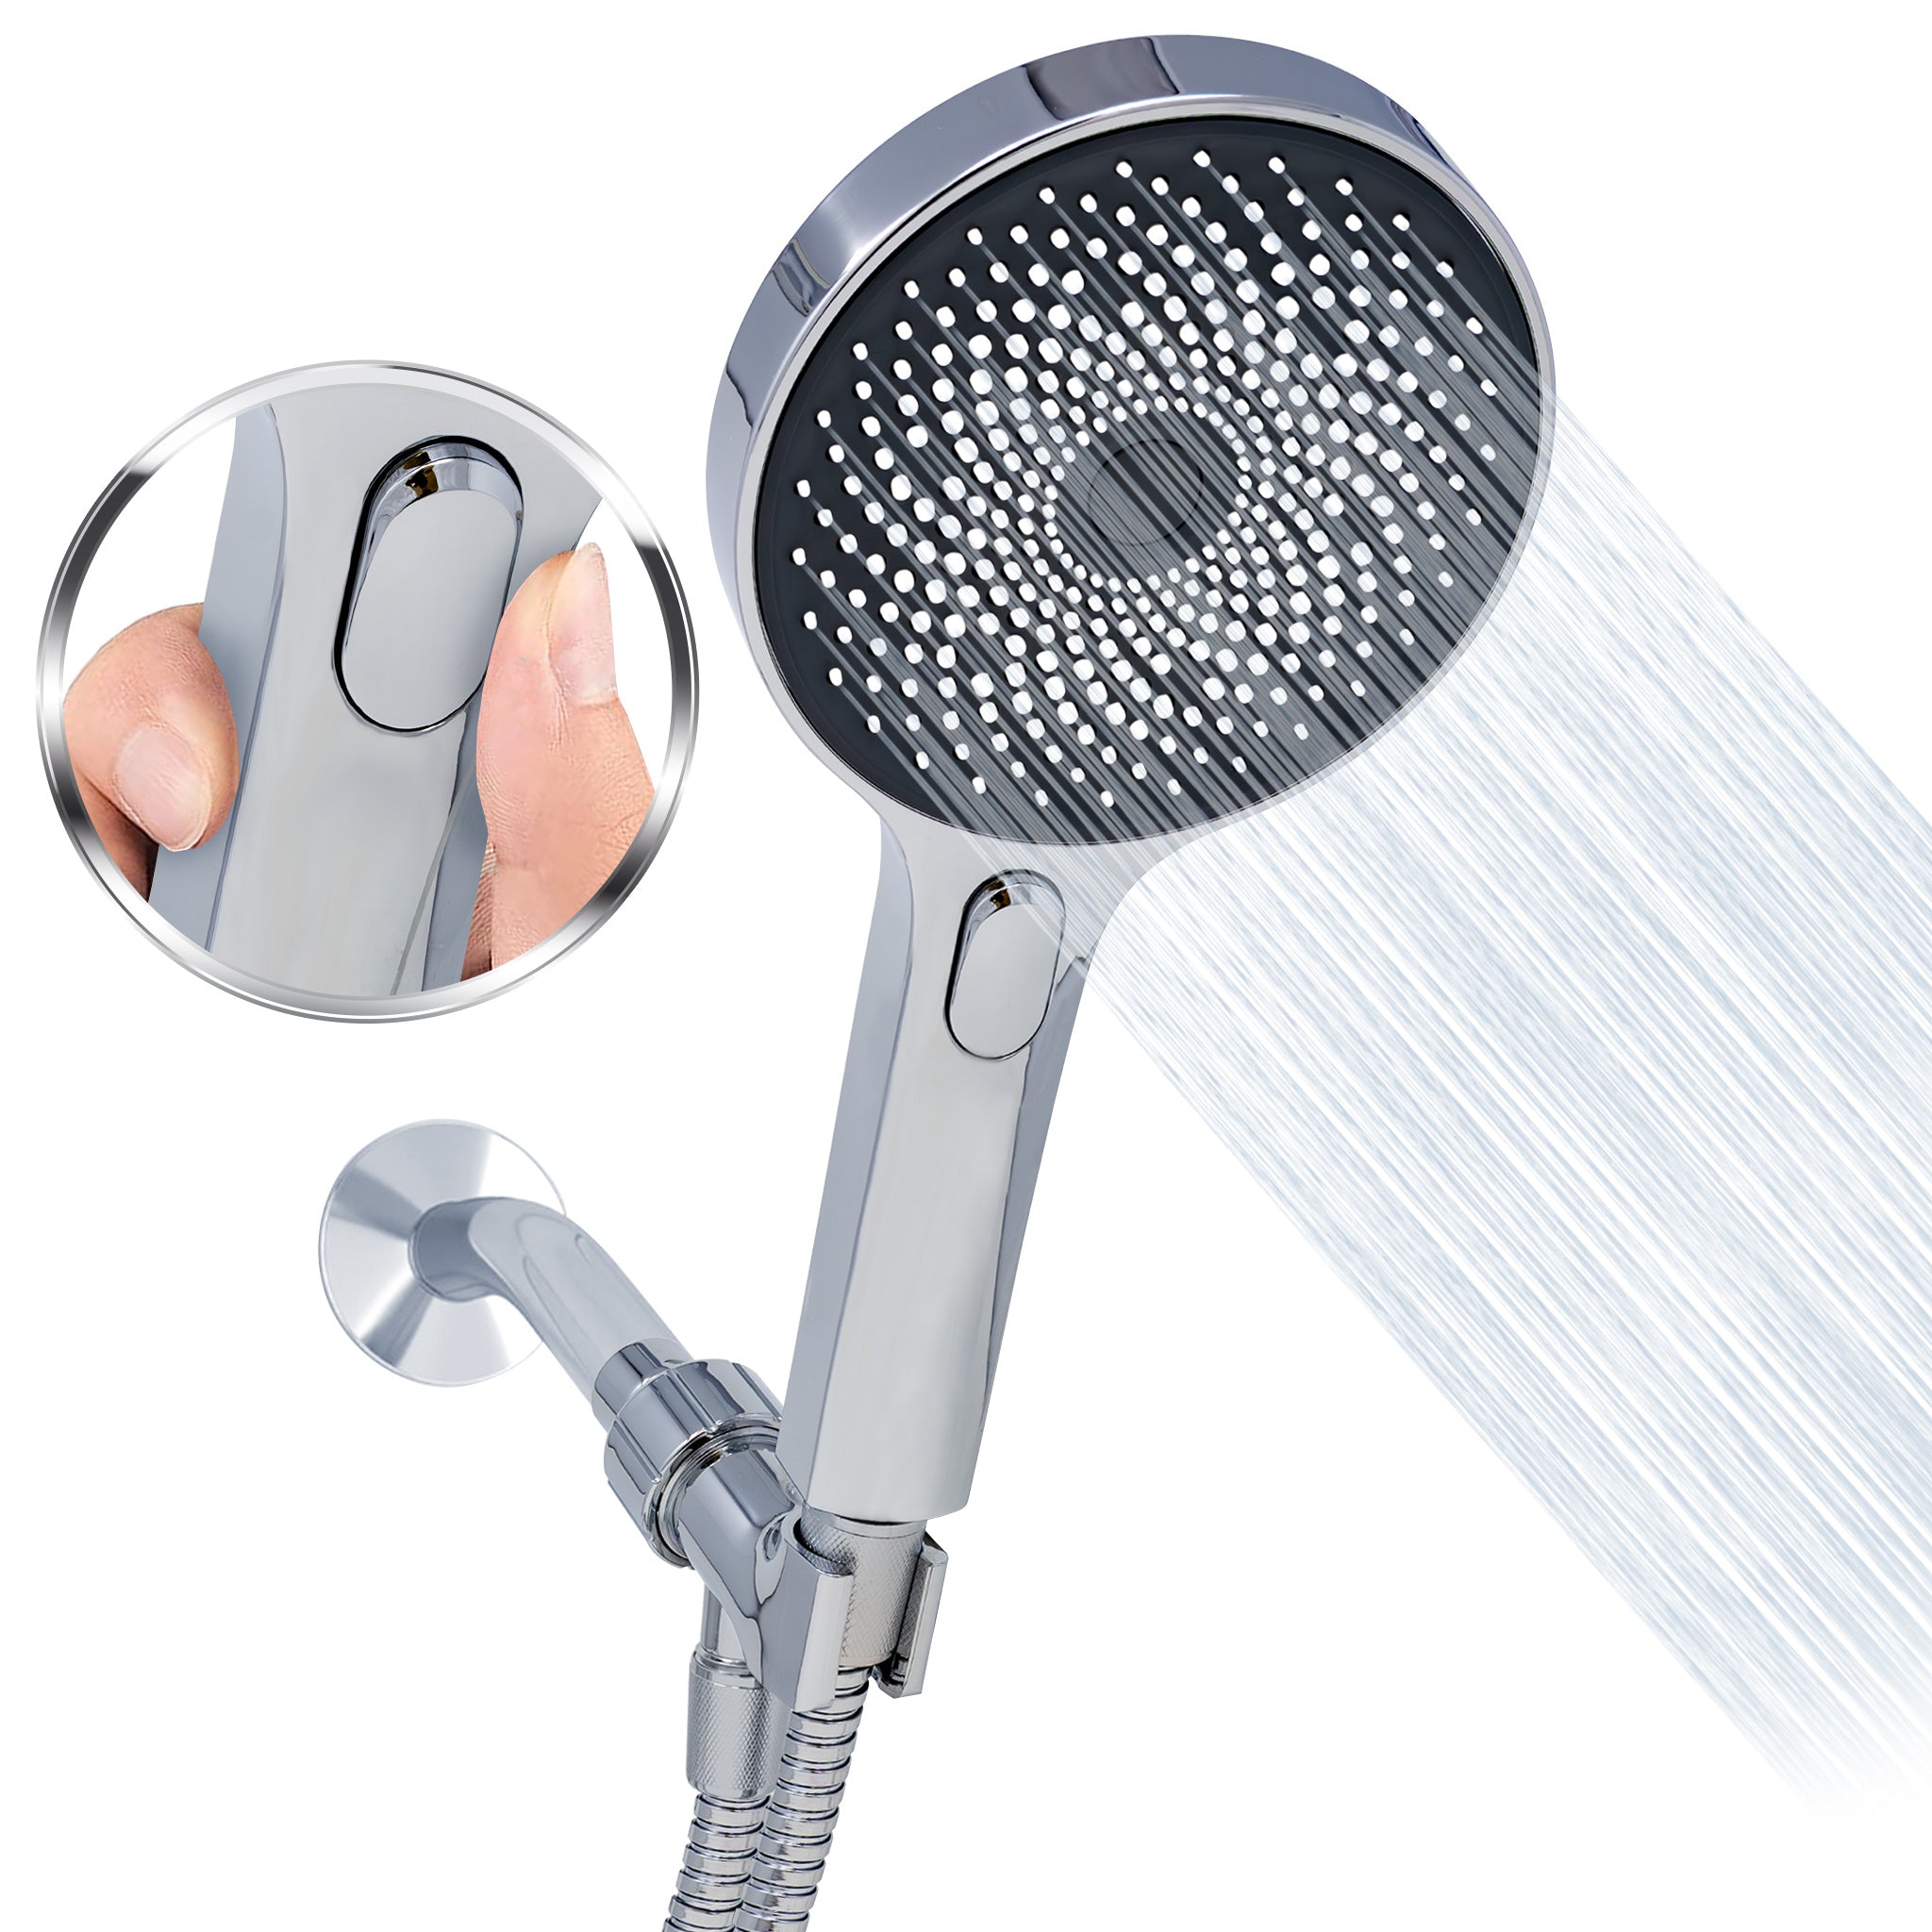 Metpure High-Pressure Handheld Shower Head with Easy Clicker - Multiple Spray Patterns. 5" Large Head for Waterfall Showering Experience. Stainless Steel Hose & Adjustable Mount Holder. Chrome